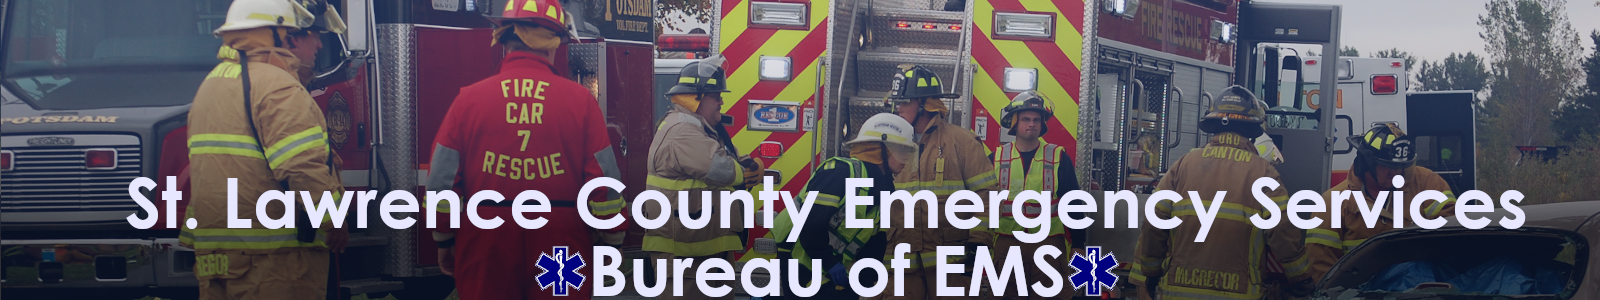 St. Lawrence County Office of Emergency Services Bureau of EMS